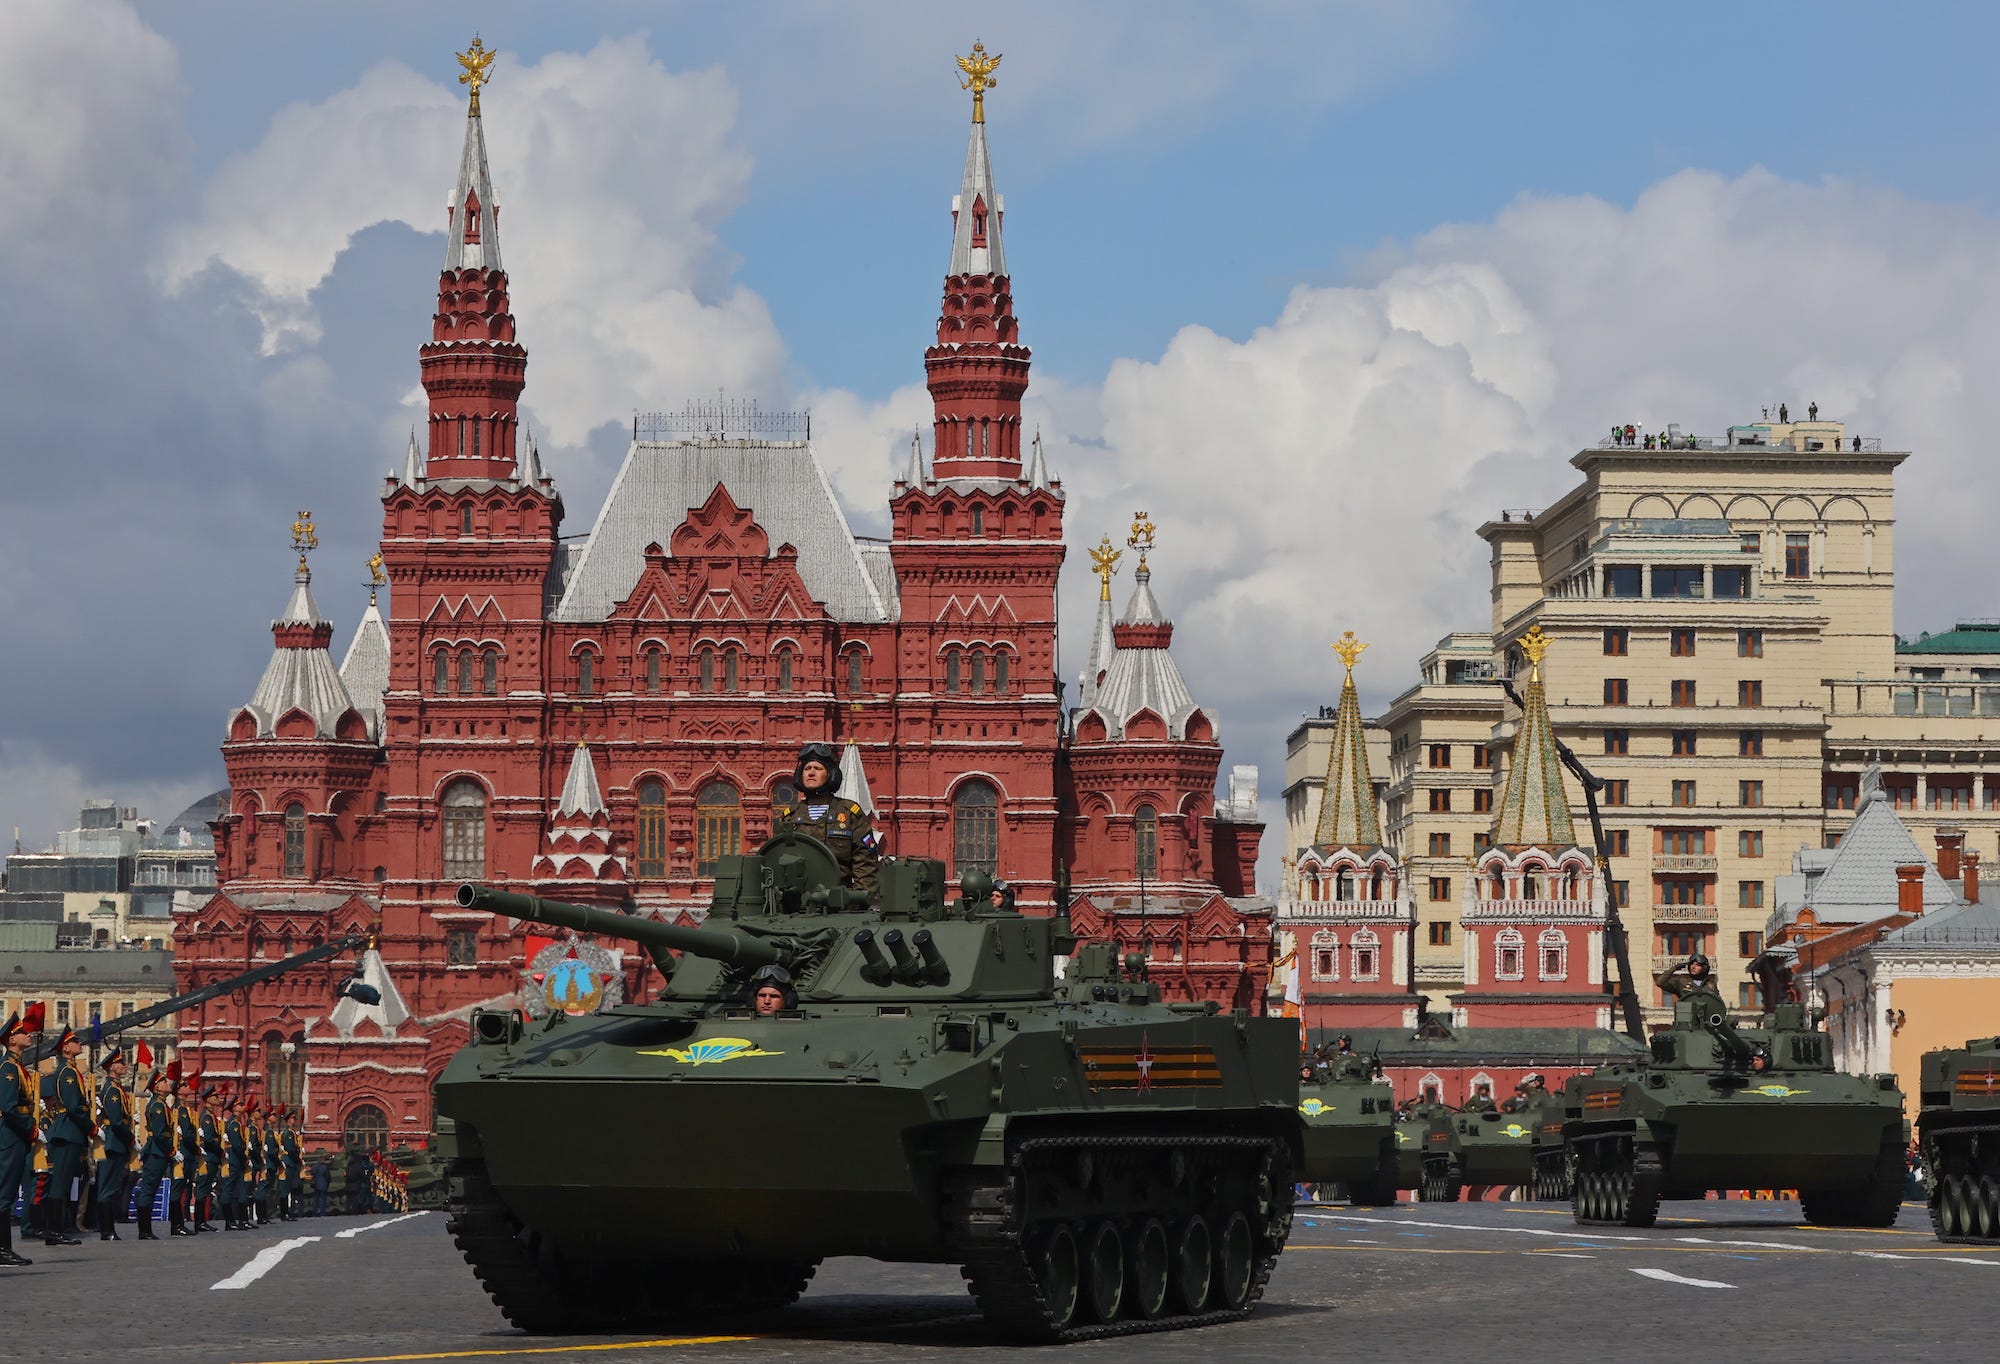 A military parade on Victory Day in Red Square, Moscow, Russia, in May 2022, to mark the 77th anniversary of the victory over Nazi Germany in World War II.